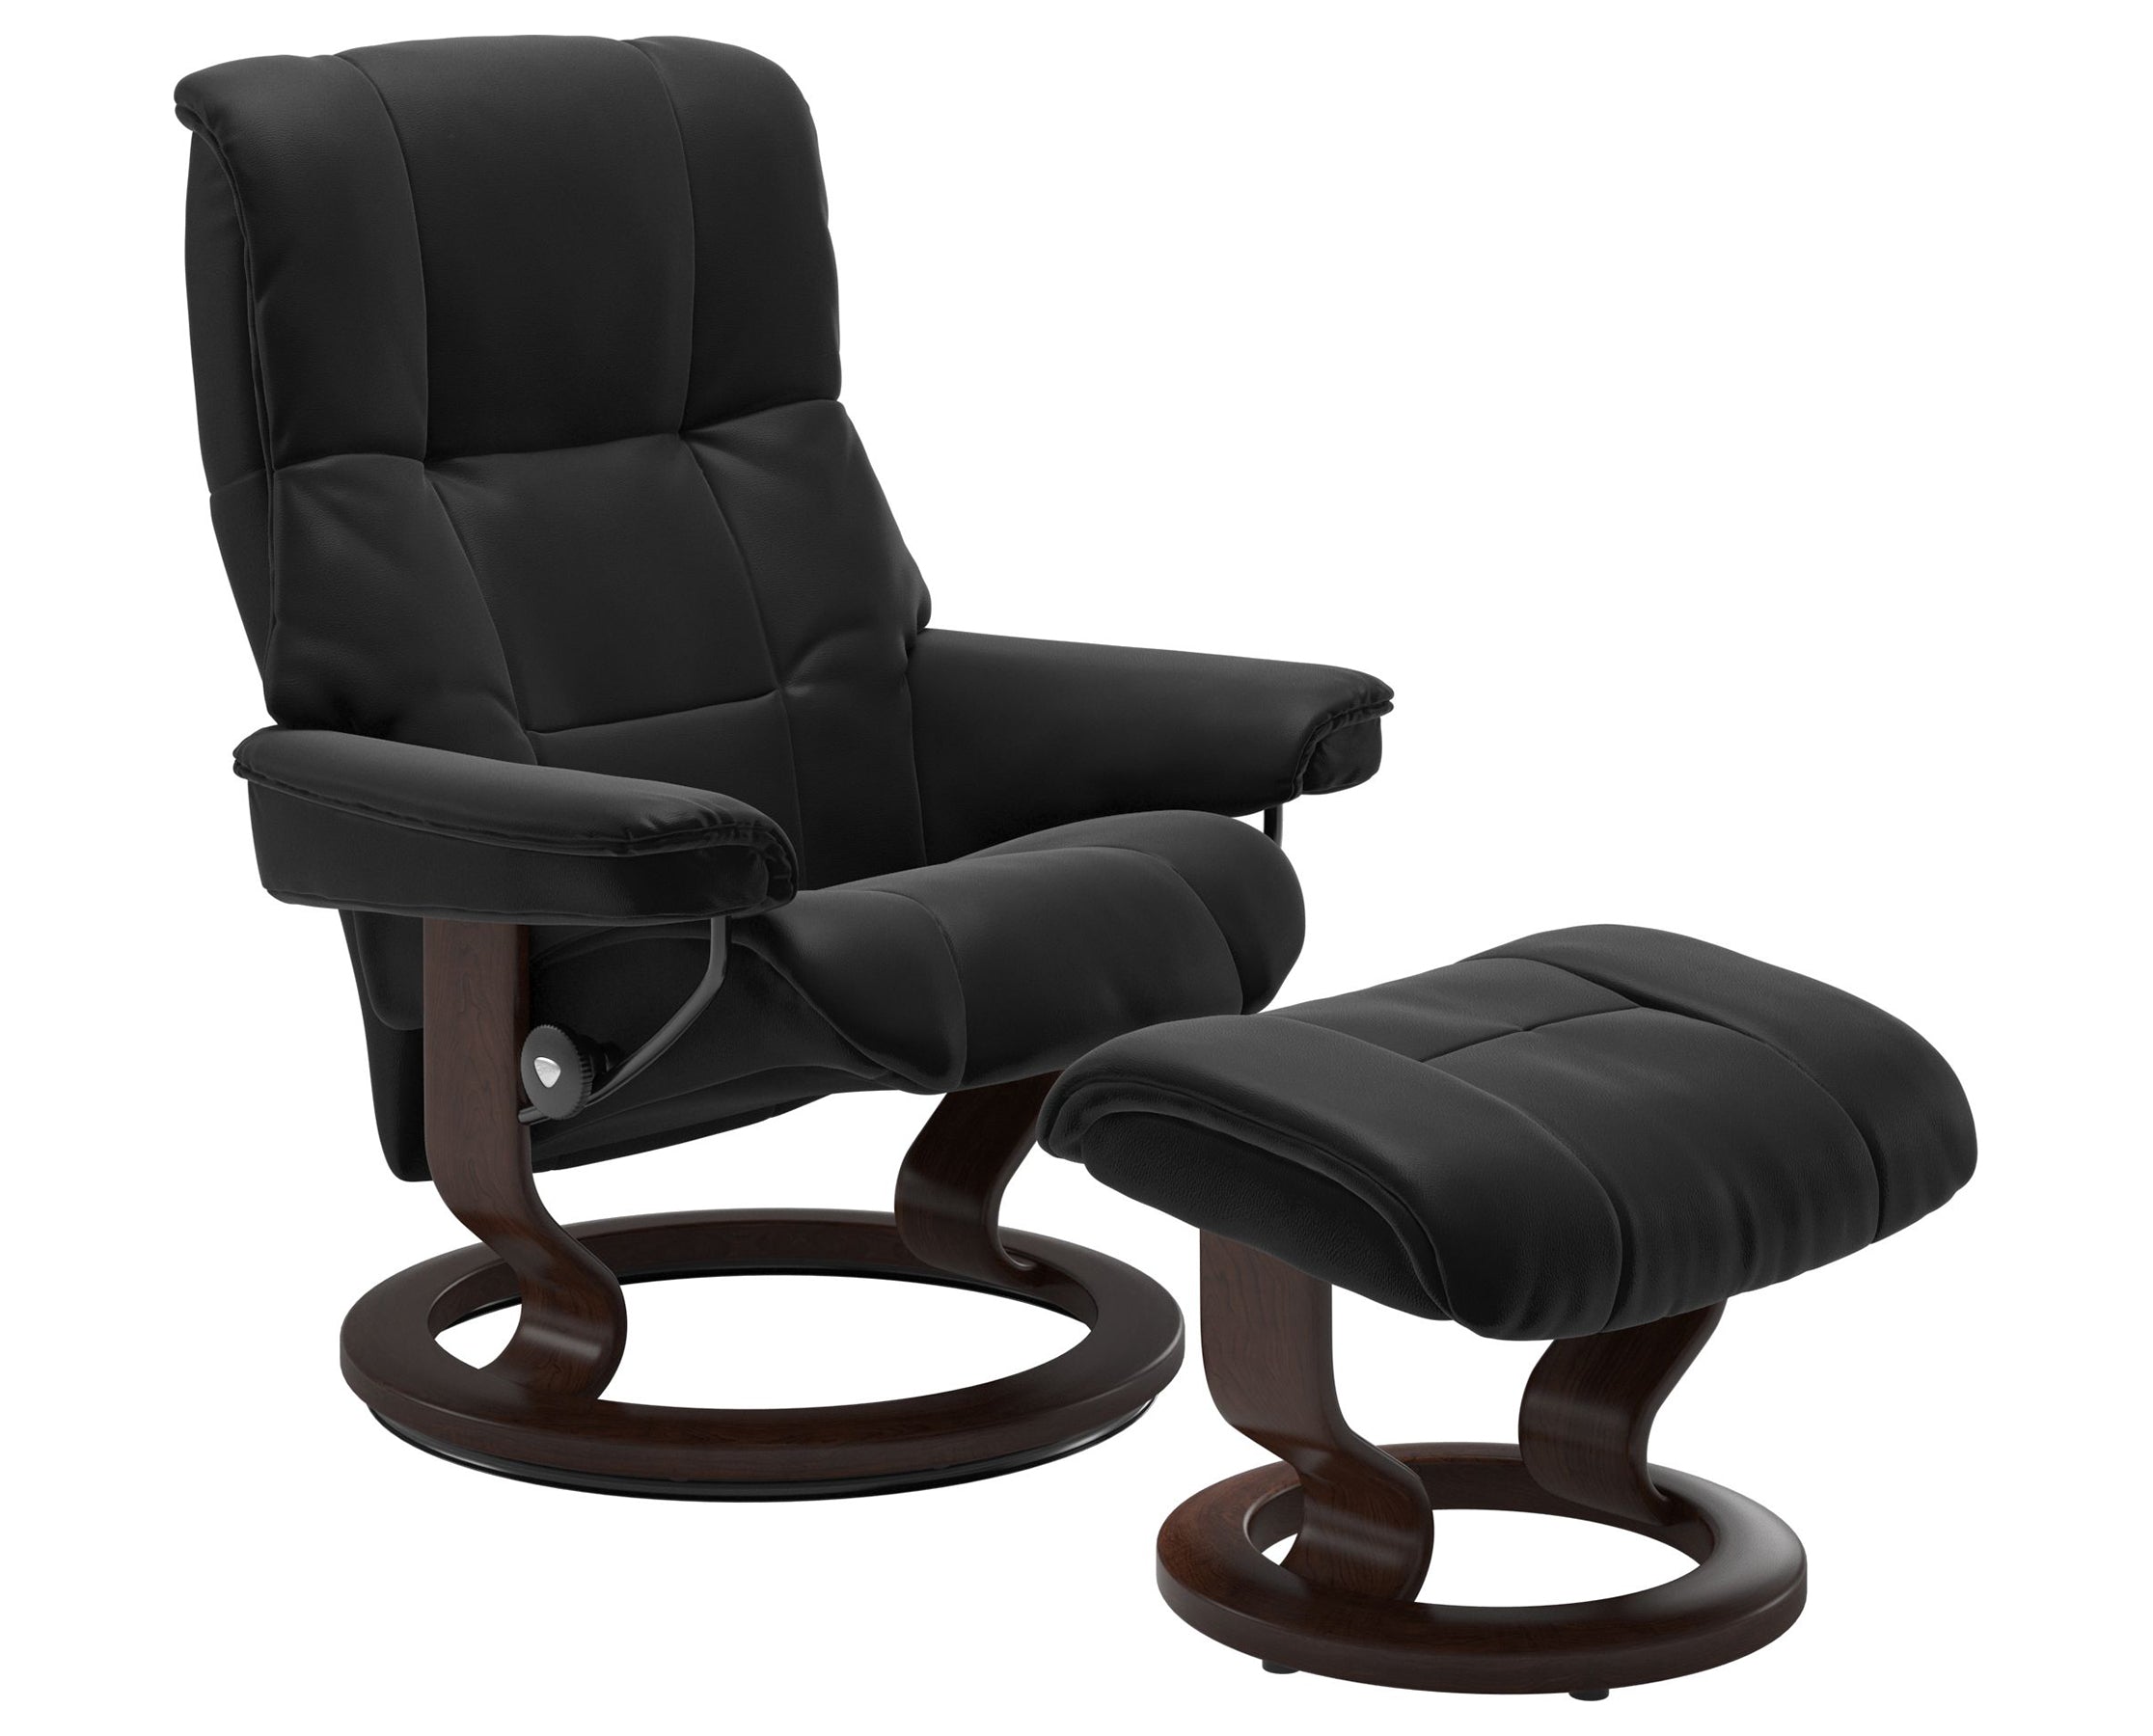 Paloma Leather Black S/M/L and Brown Base | Stressless Mayfair Classic Recliner | Valley Ridge Furniture